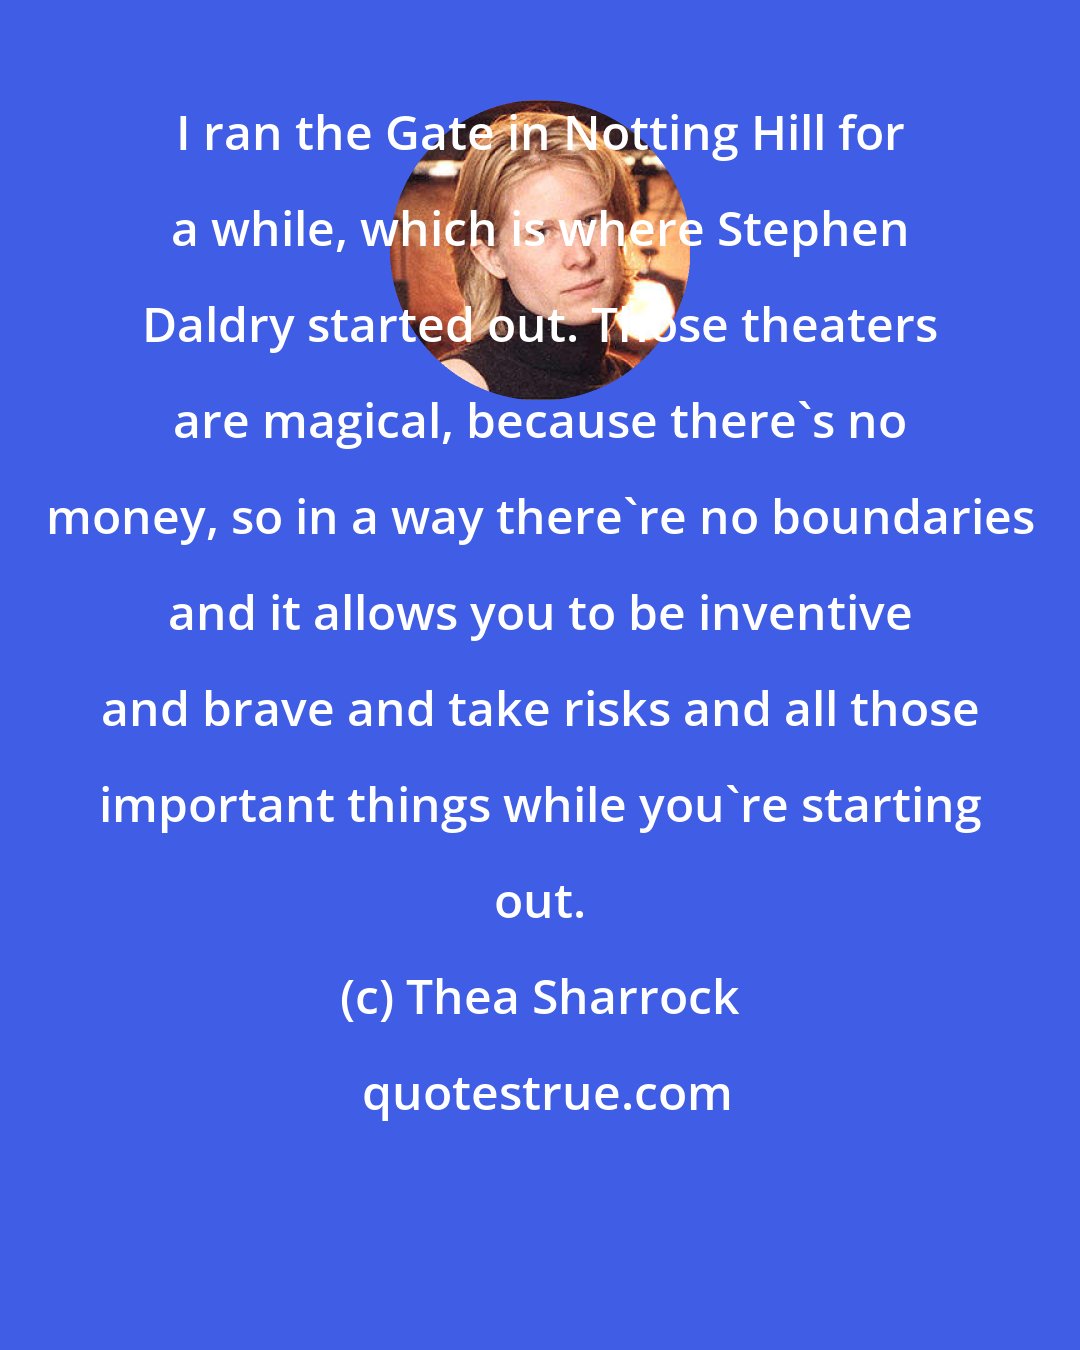 Thea Sharrock: I ran the Gate in Notting Hill for a while, which is where Stephen Daldry started out. Those theaters are magical, because there's no money, so in a way there're no boundaries and it allows you to be inventive and brave and take risks and all those important things while you're starting out.